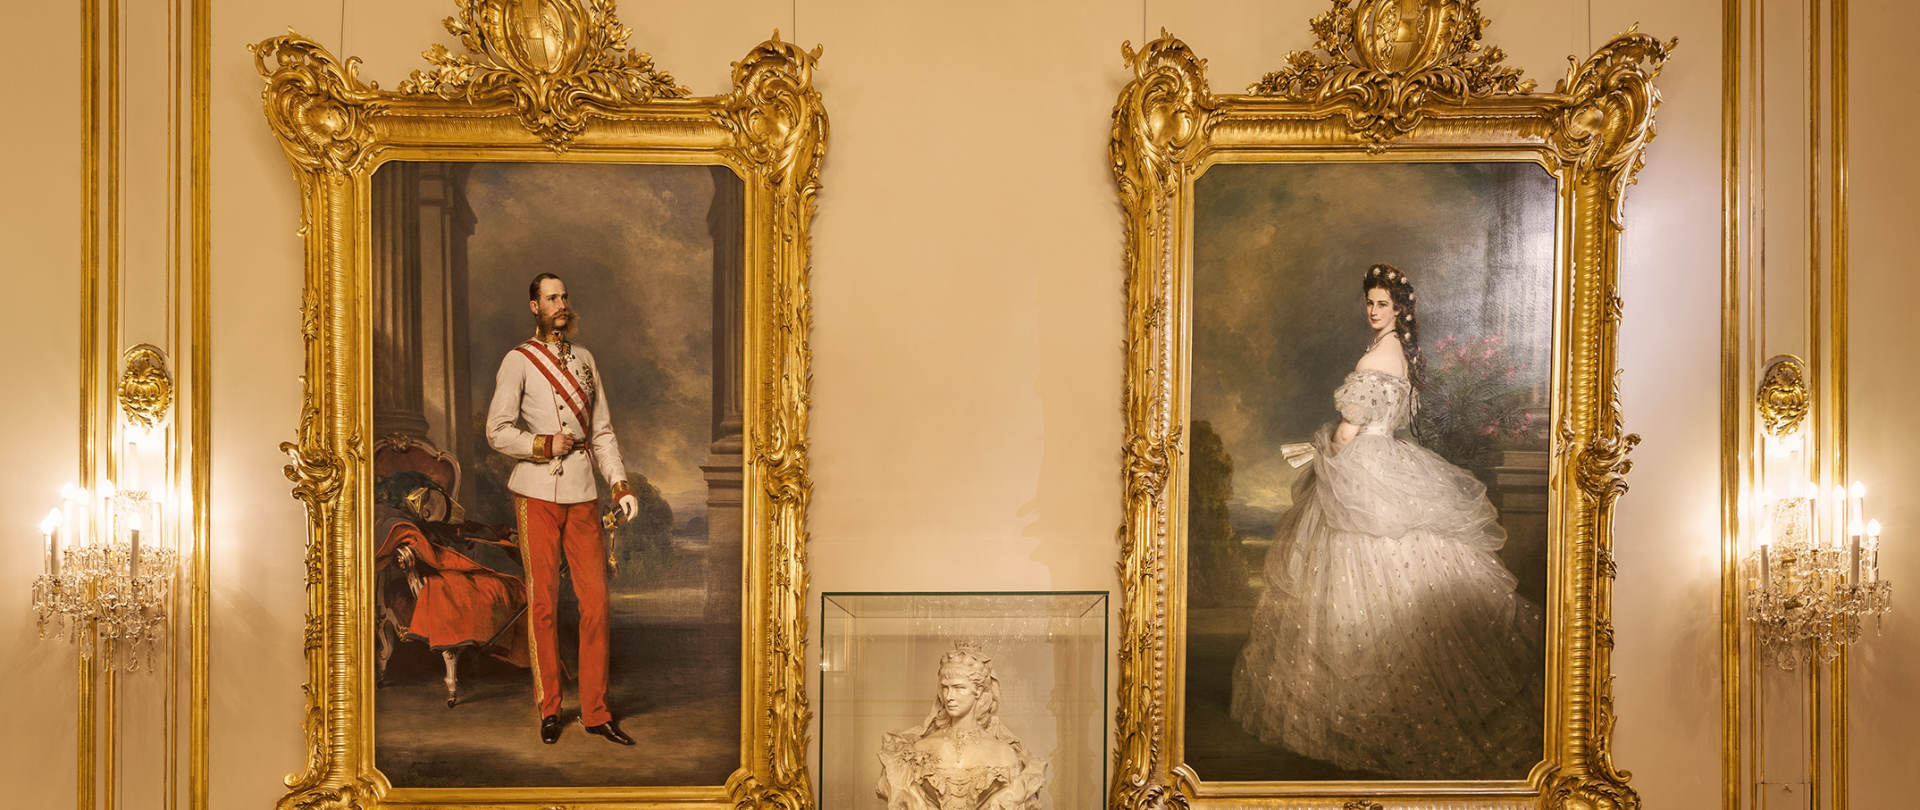 Sisi Museum - Review of the life of empress Elisabeth